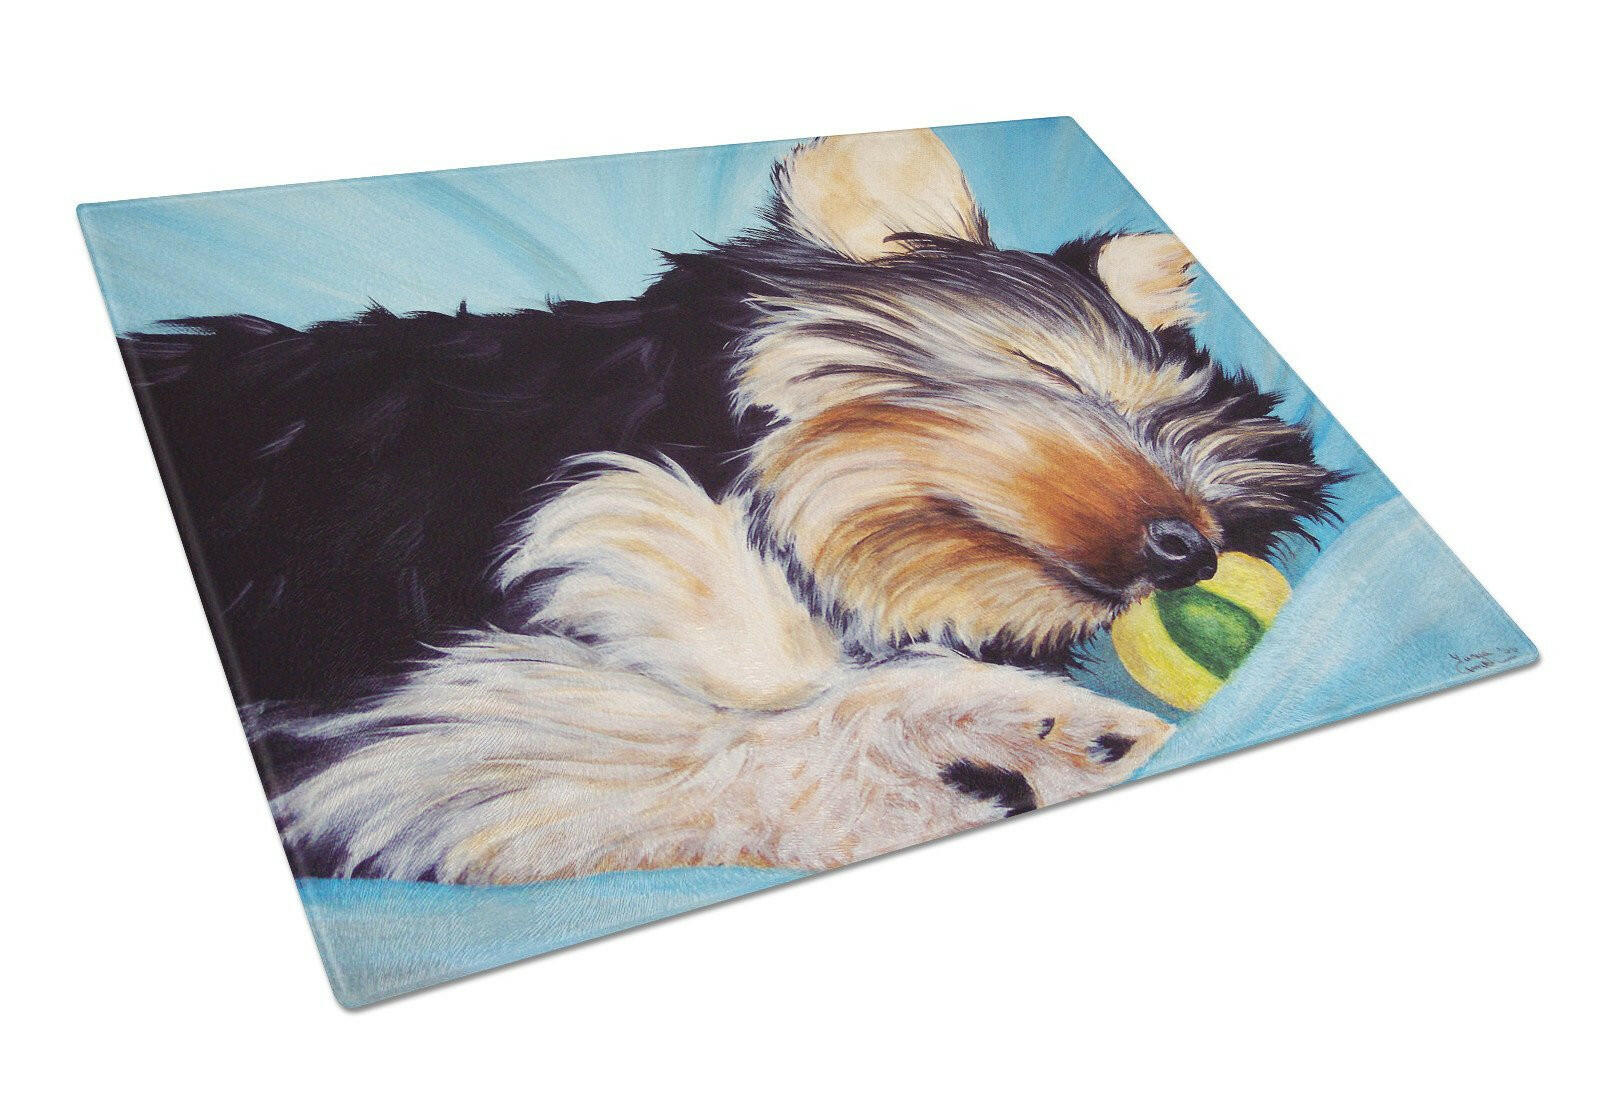 Naptime Yorkie Yorkshire Terrier Glass Cutting Board Large AMB1075LCB by Caroline's Treasures